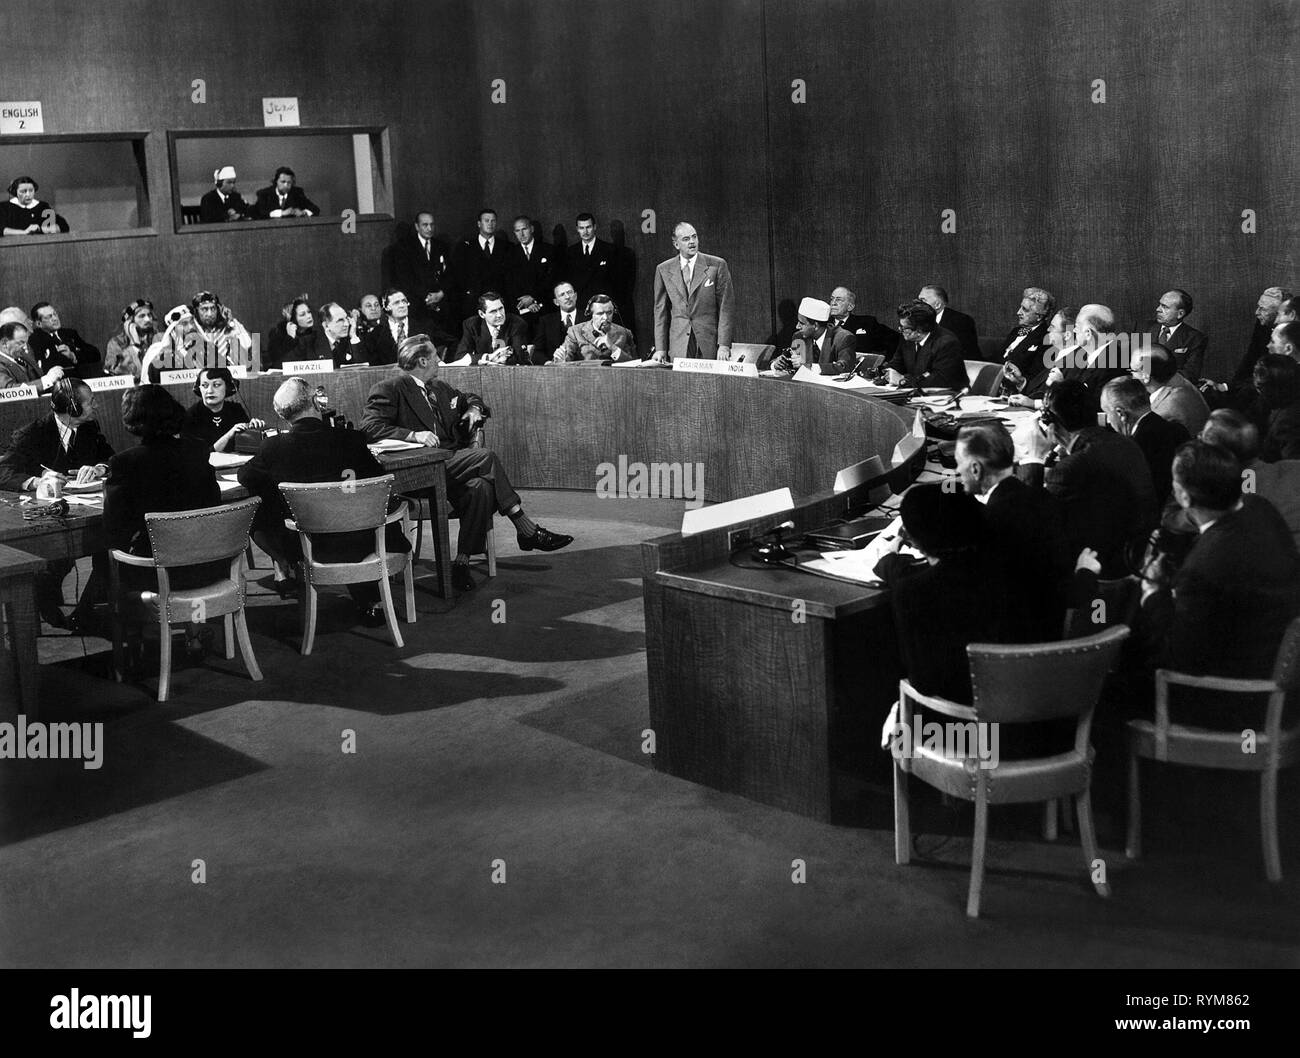 WORLD LEADERS CONFERENCE SCENE, WHEN WORLDS COLLIDE, 1951 Stock Photo